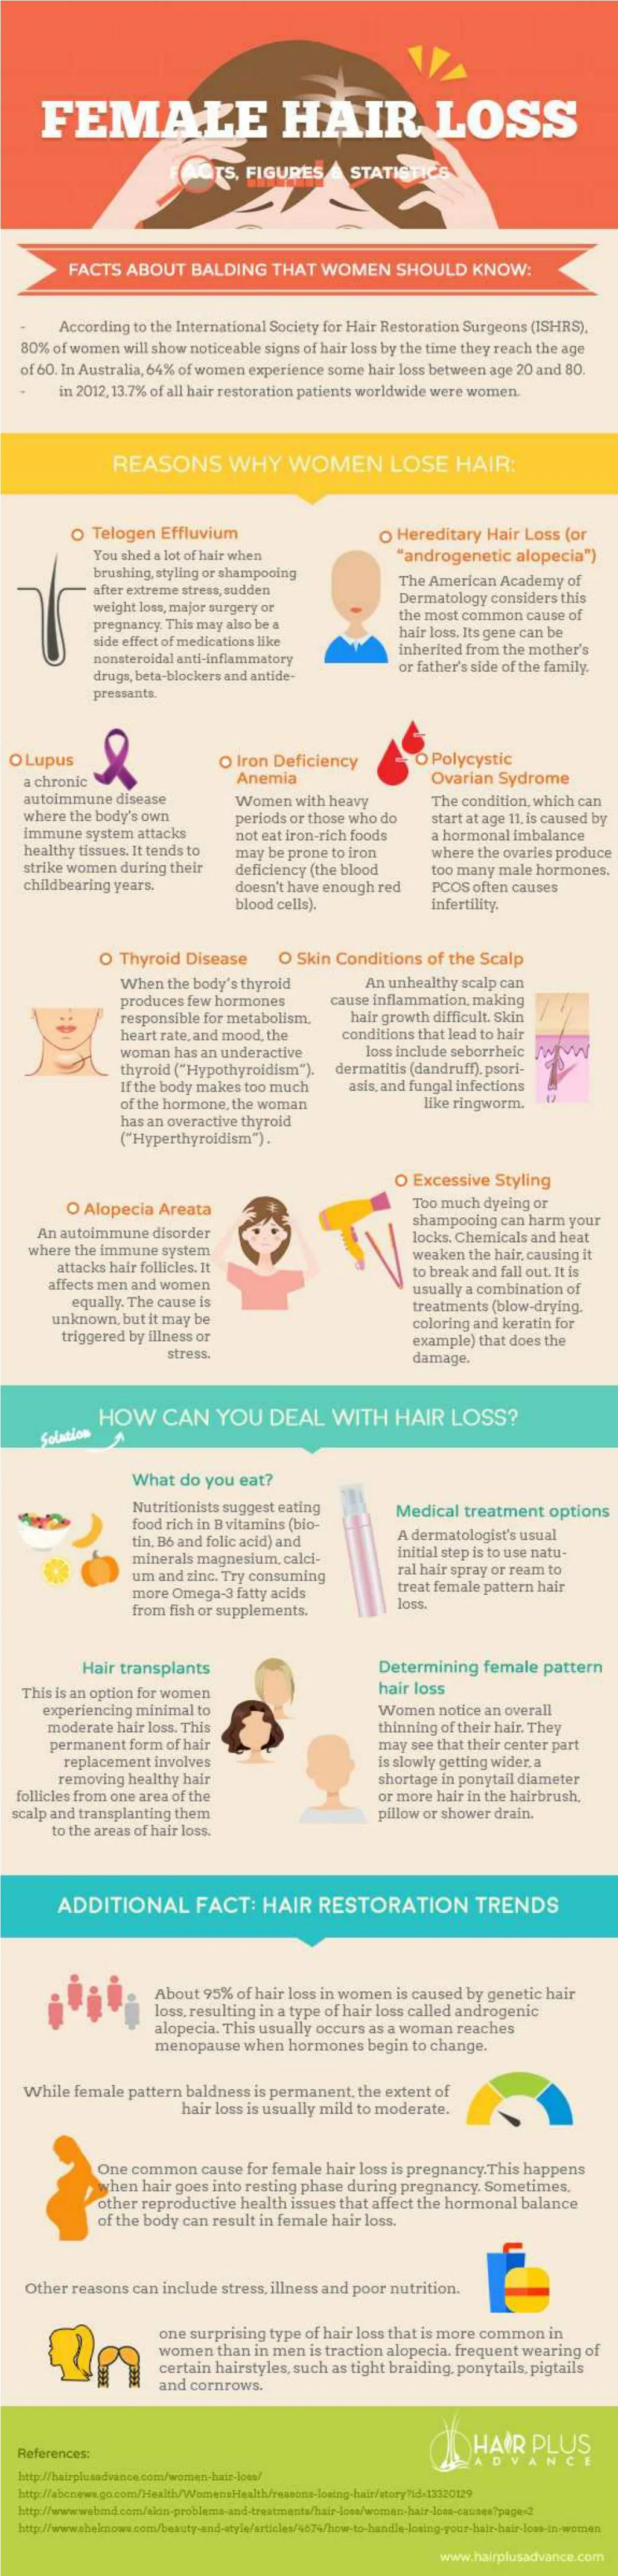 PPT - [Infographic] Female Hair Loss Facts and Statistics PowerPoint ...